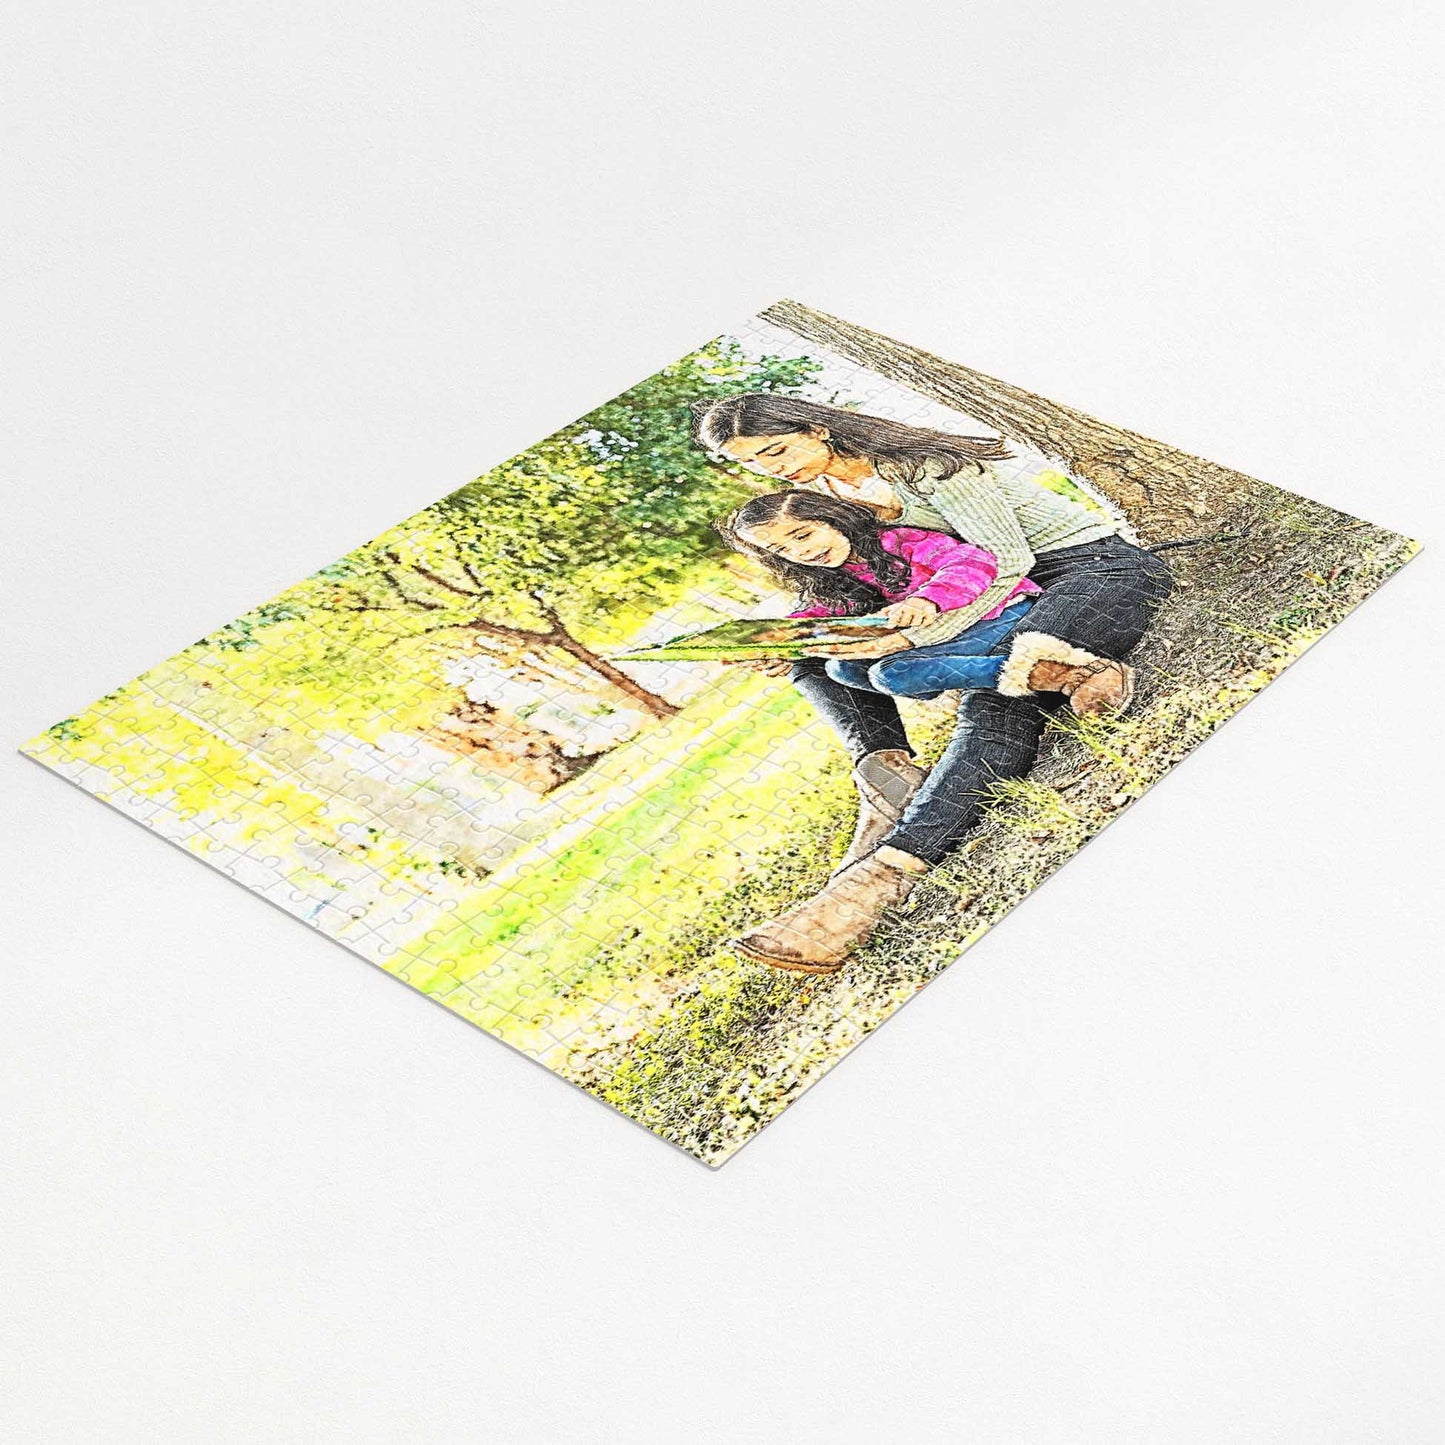 Unleash joy with a Personalised Watercolor Jigsaw Puzzle painting. Its watercolour effect enhances vibrant, vivid colours on a charming handmade wooden or cardboard puzzle. This dye sublimation print embodies fun, happiness, and excitement